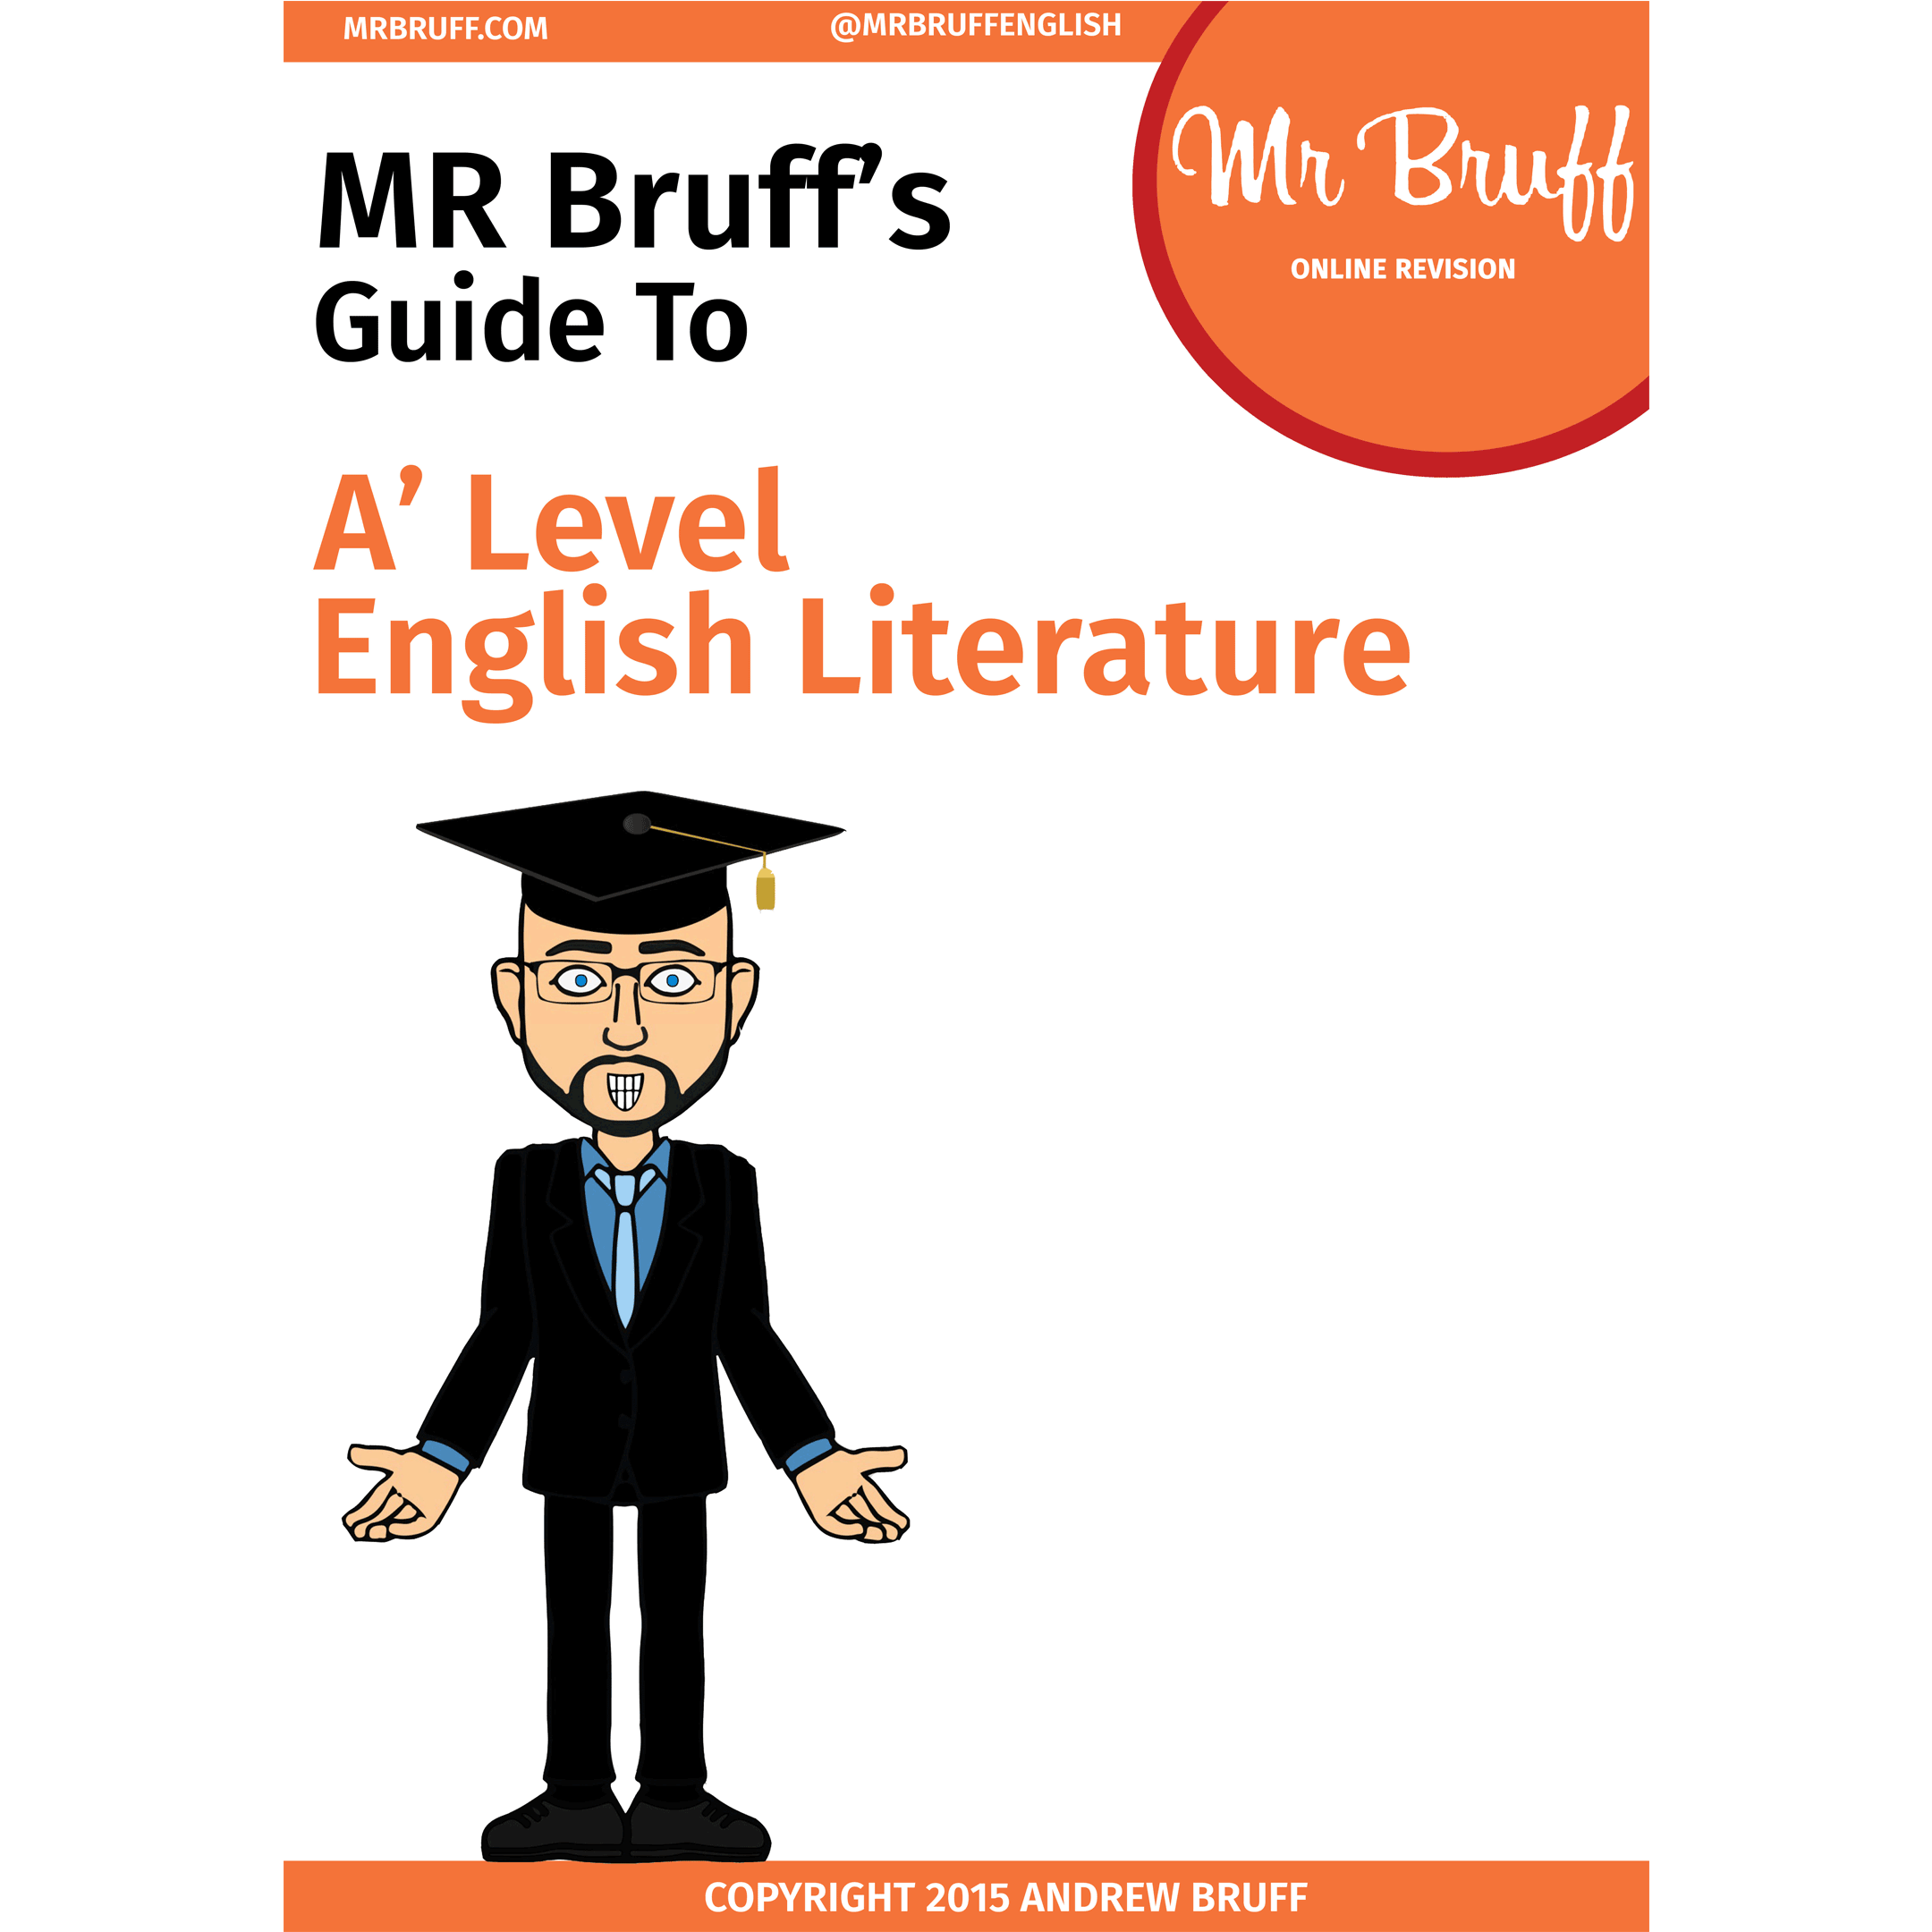 How to Write English Literature A Level Coursework